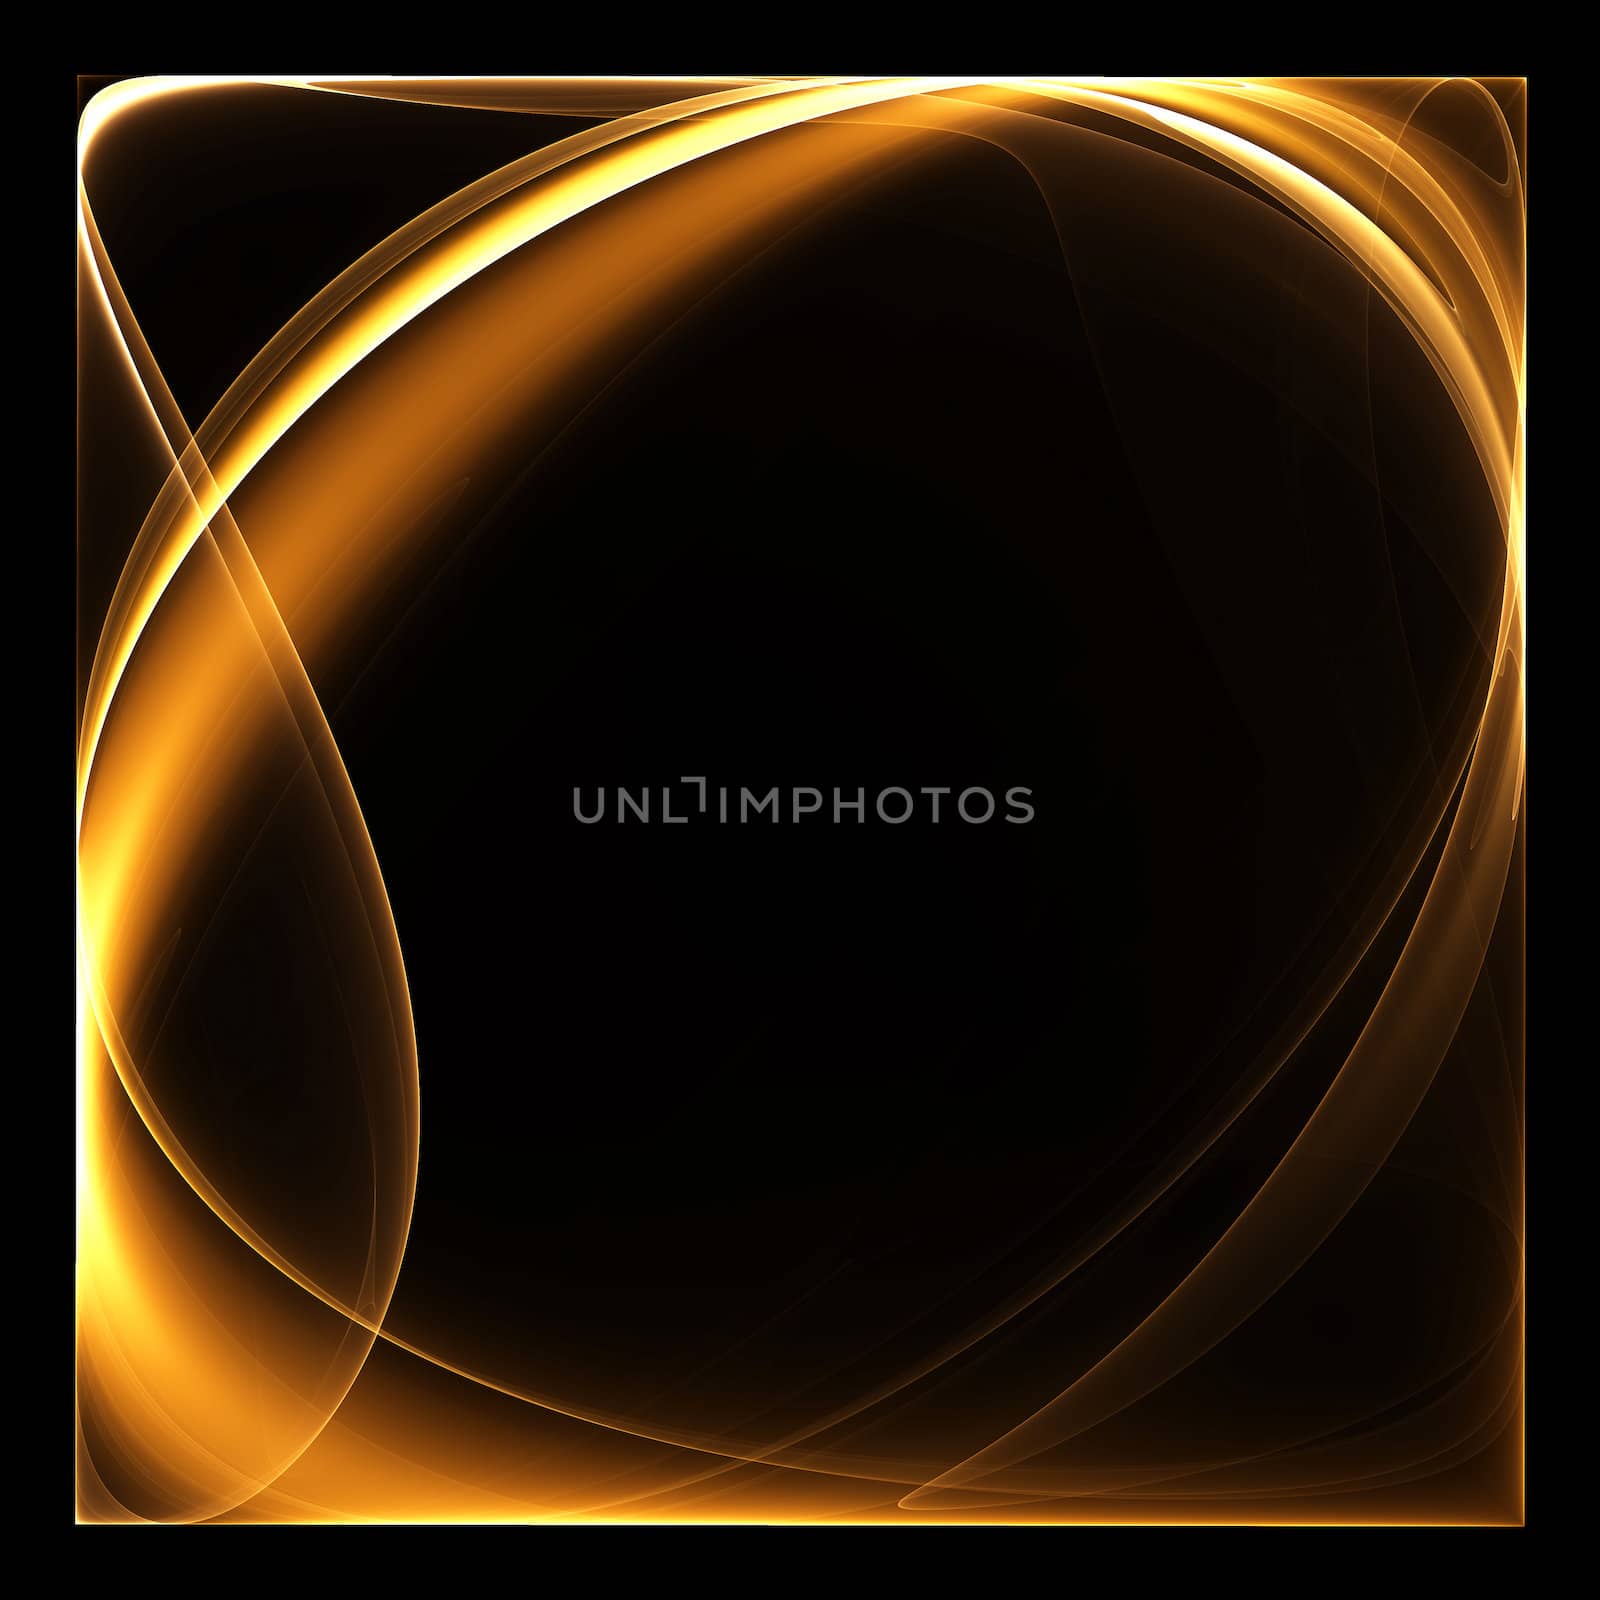 Abstract color image on a black background design illustration.  by mozzyb